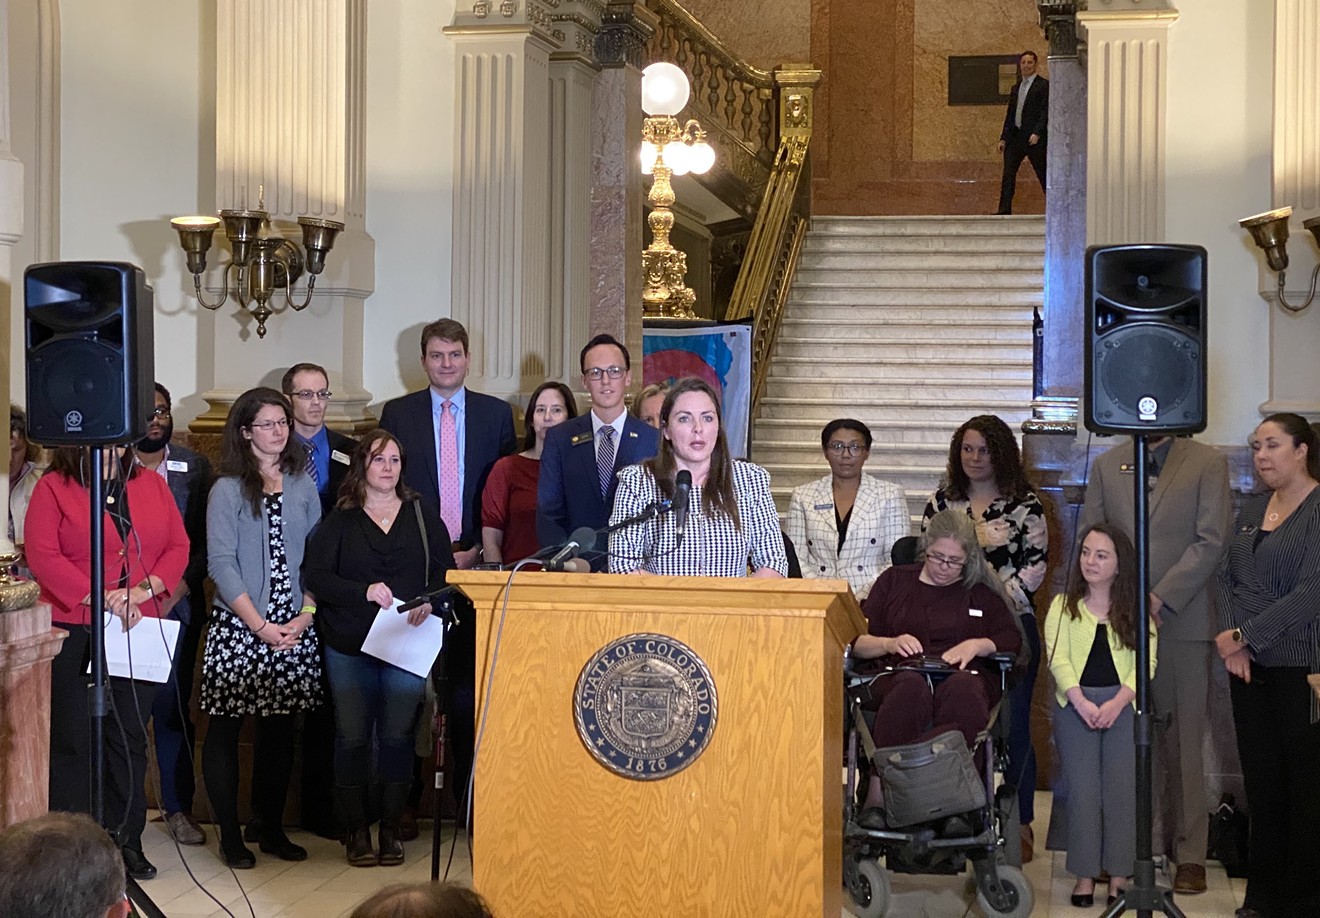 Colorado Democrats unveiled their proposal to create a state-level public option for health insurance at the Capitol on March 5.